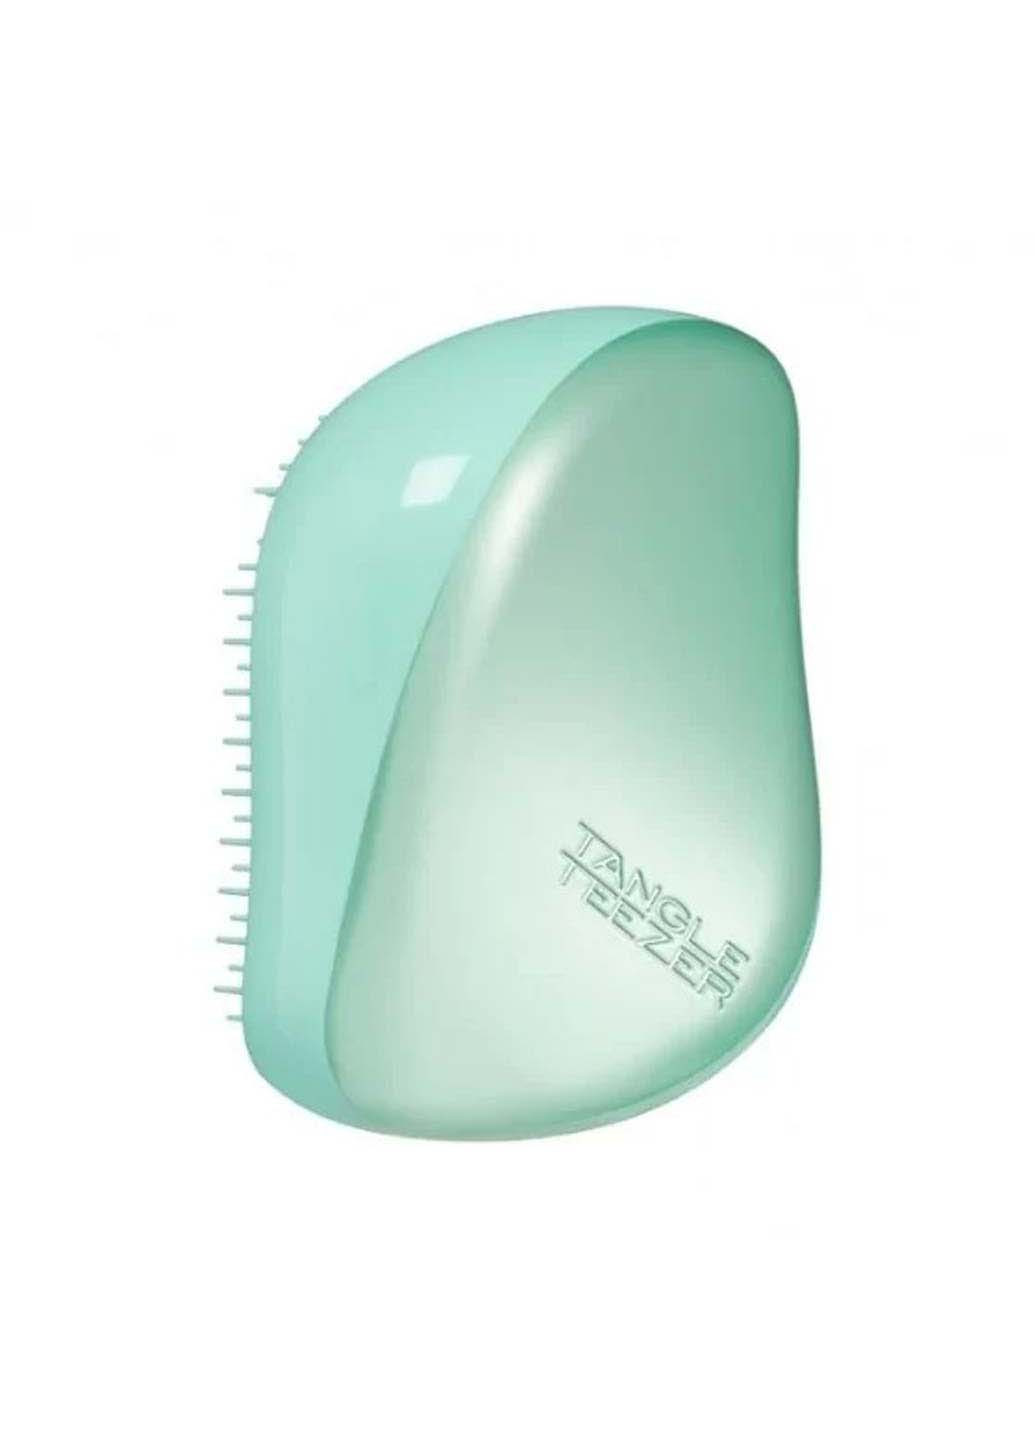 Расческа для волос Compact Styler Frosted Teal Chrome Tangle Teezer (275333568)